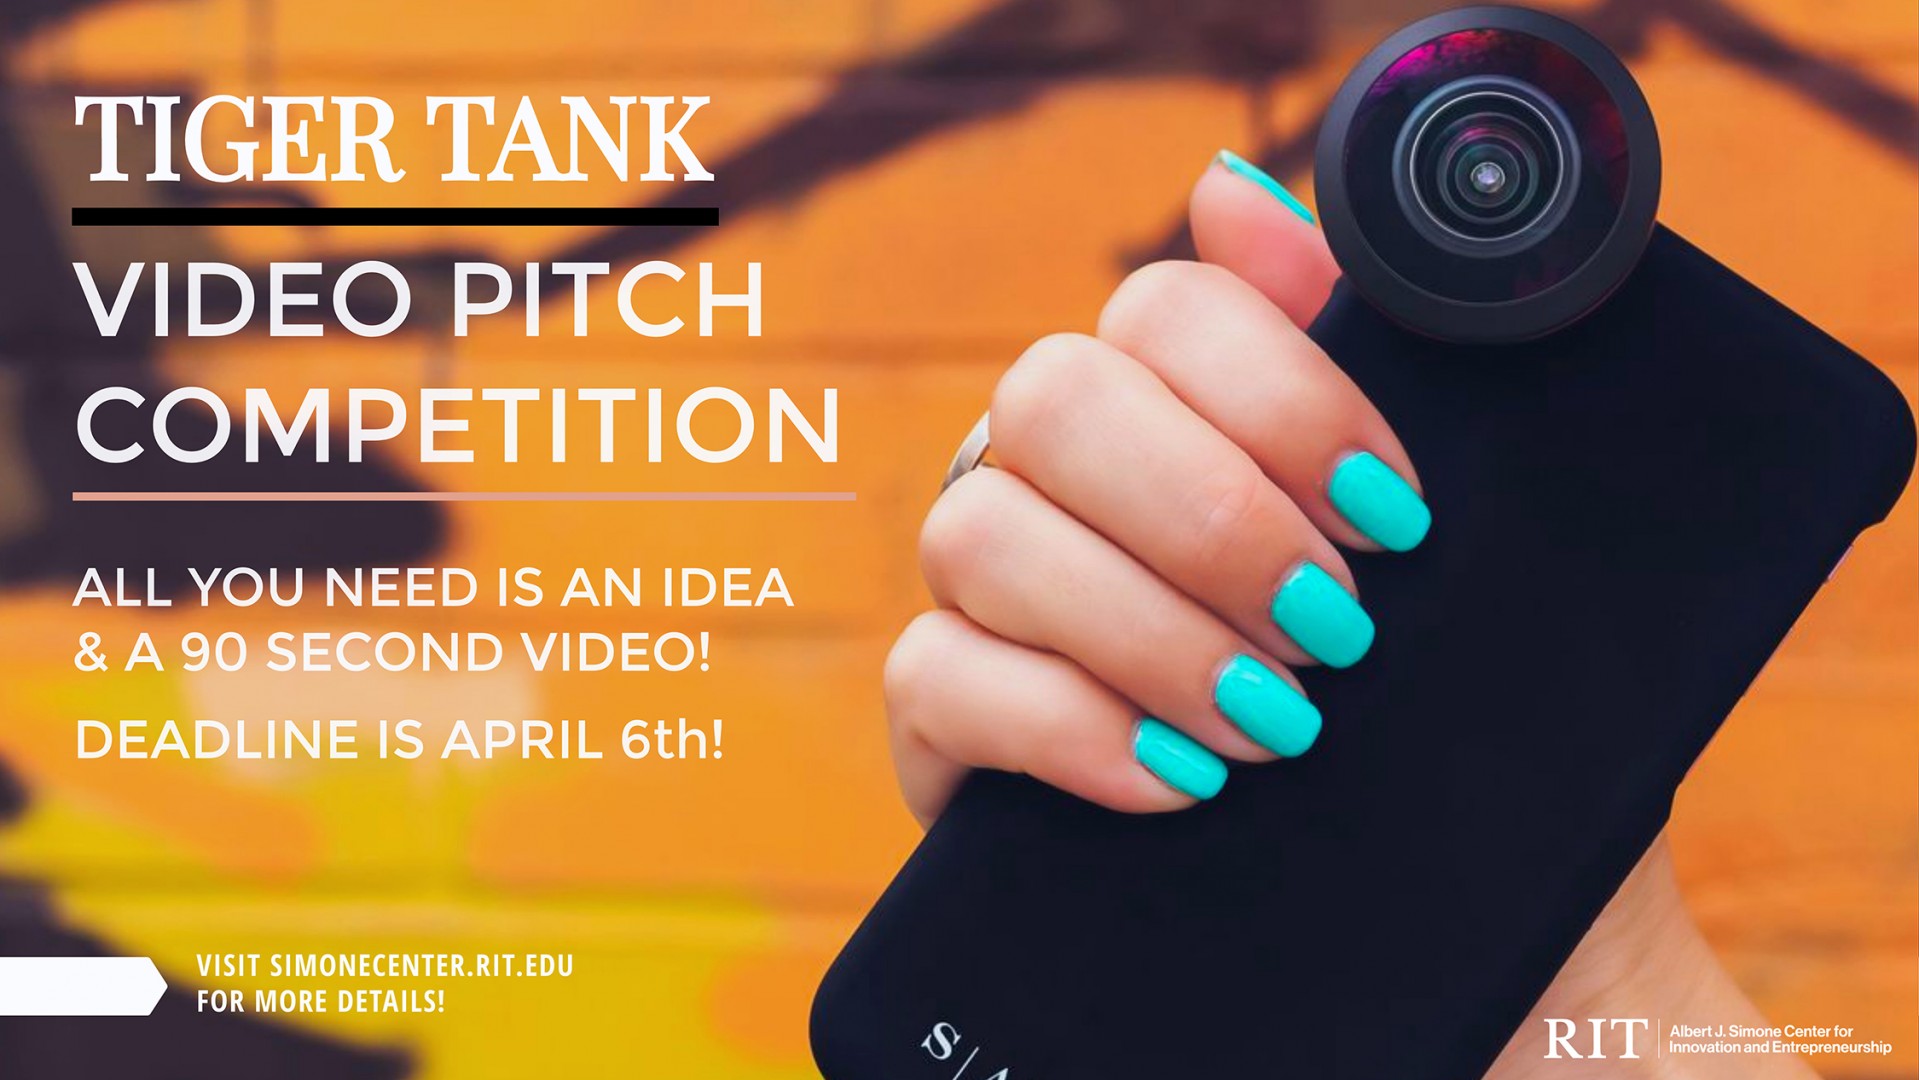 Tiger Tank Video Pitch Competition